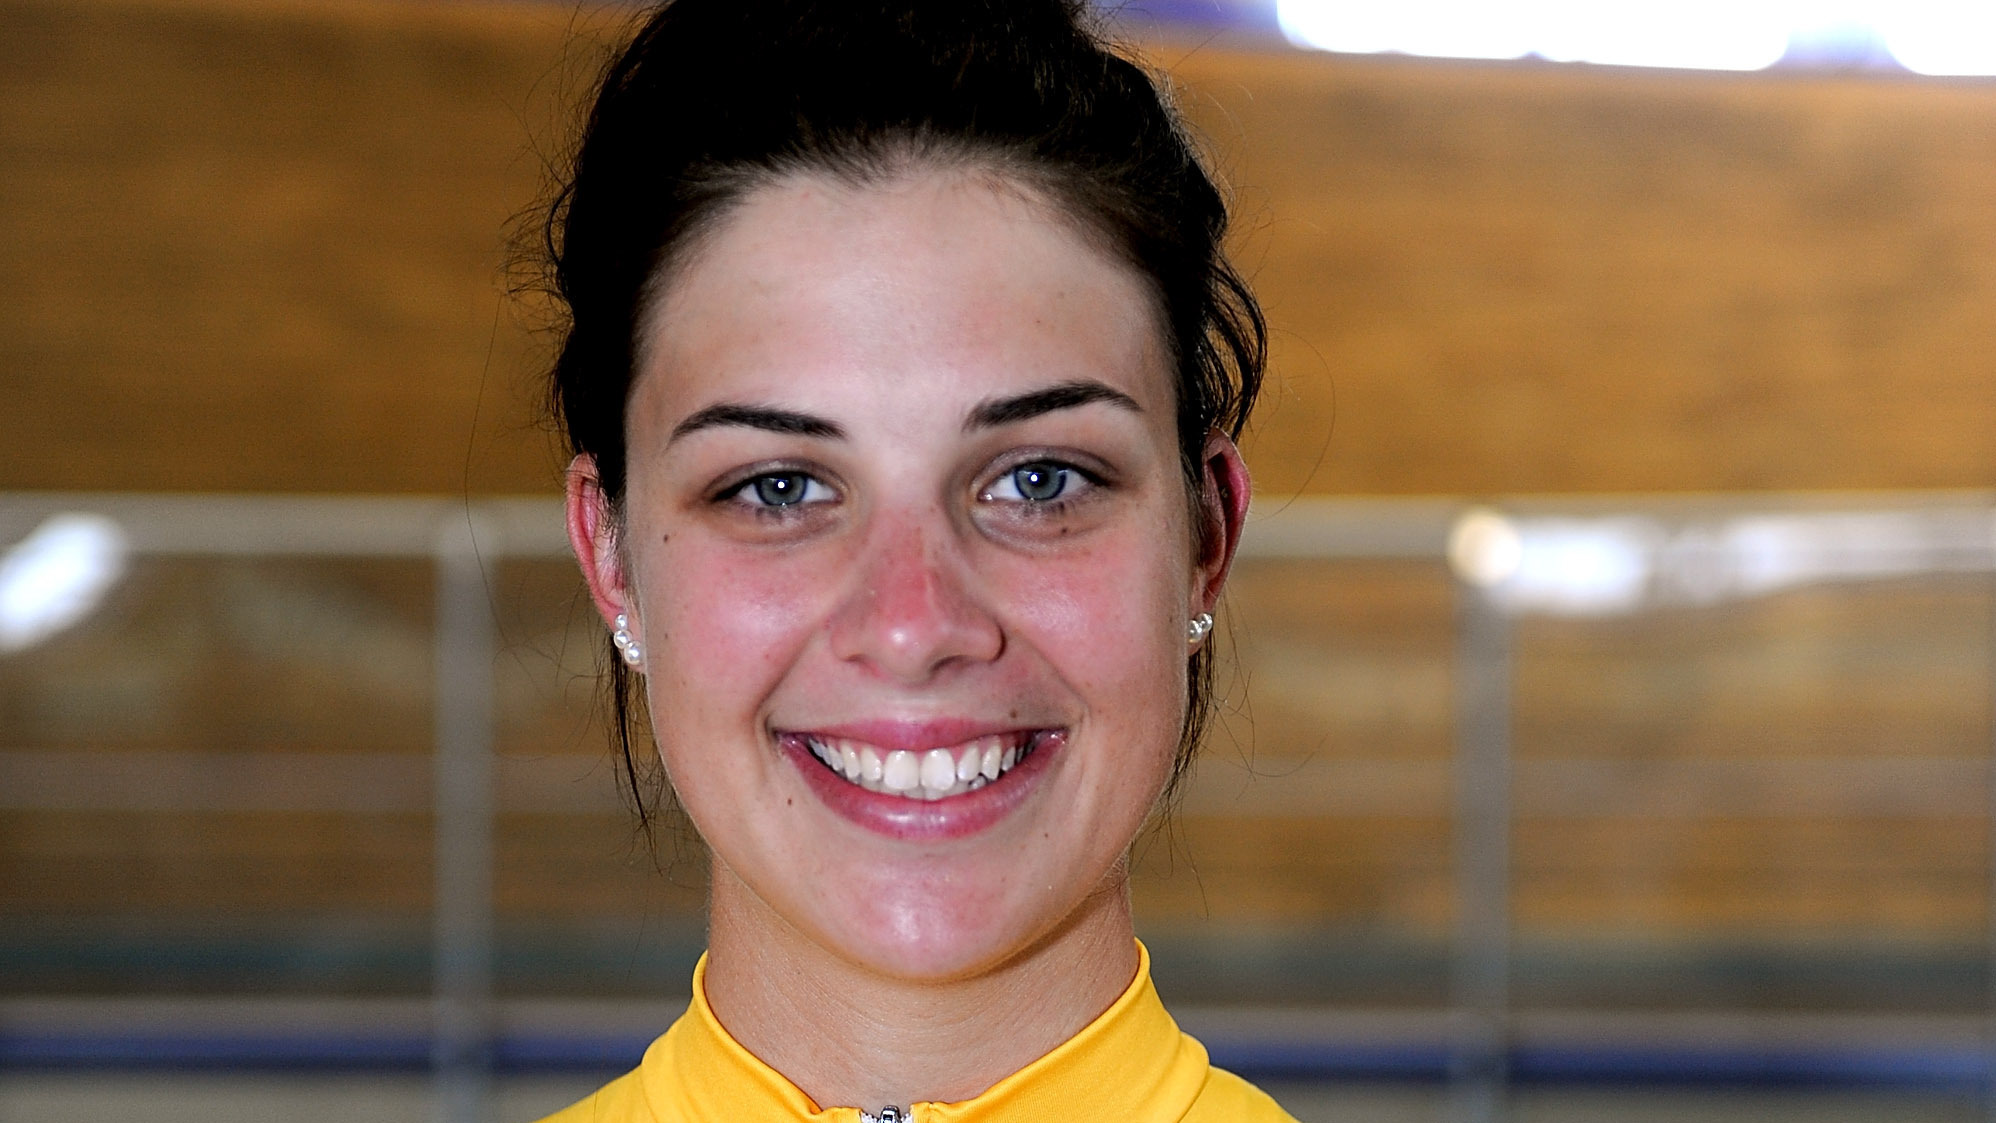 Melissa Hoskins of Australia's women's track cycling team poses during a media day on July 17, 2012, in Brescia, Italy.